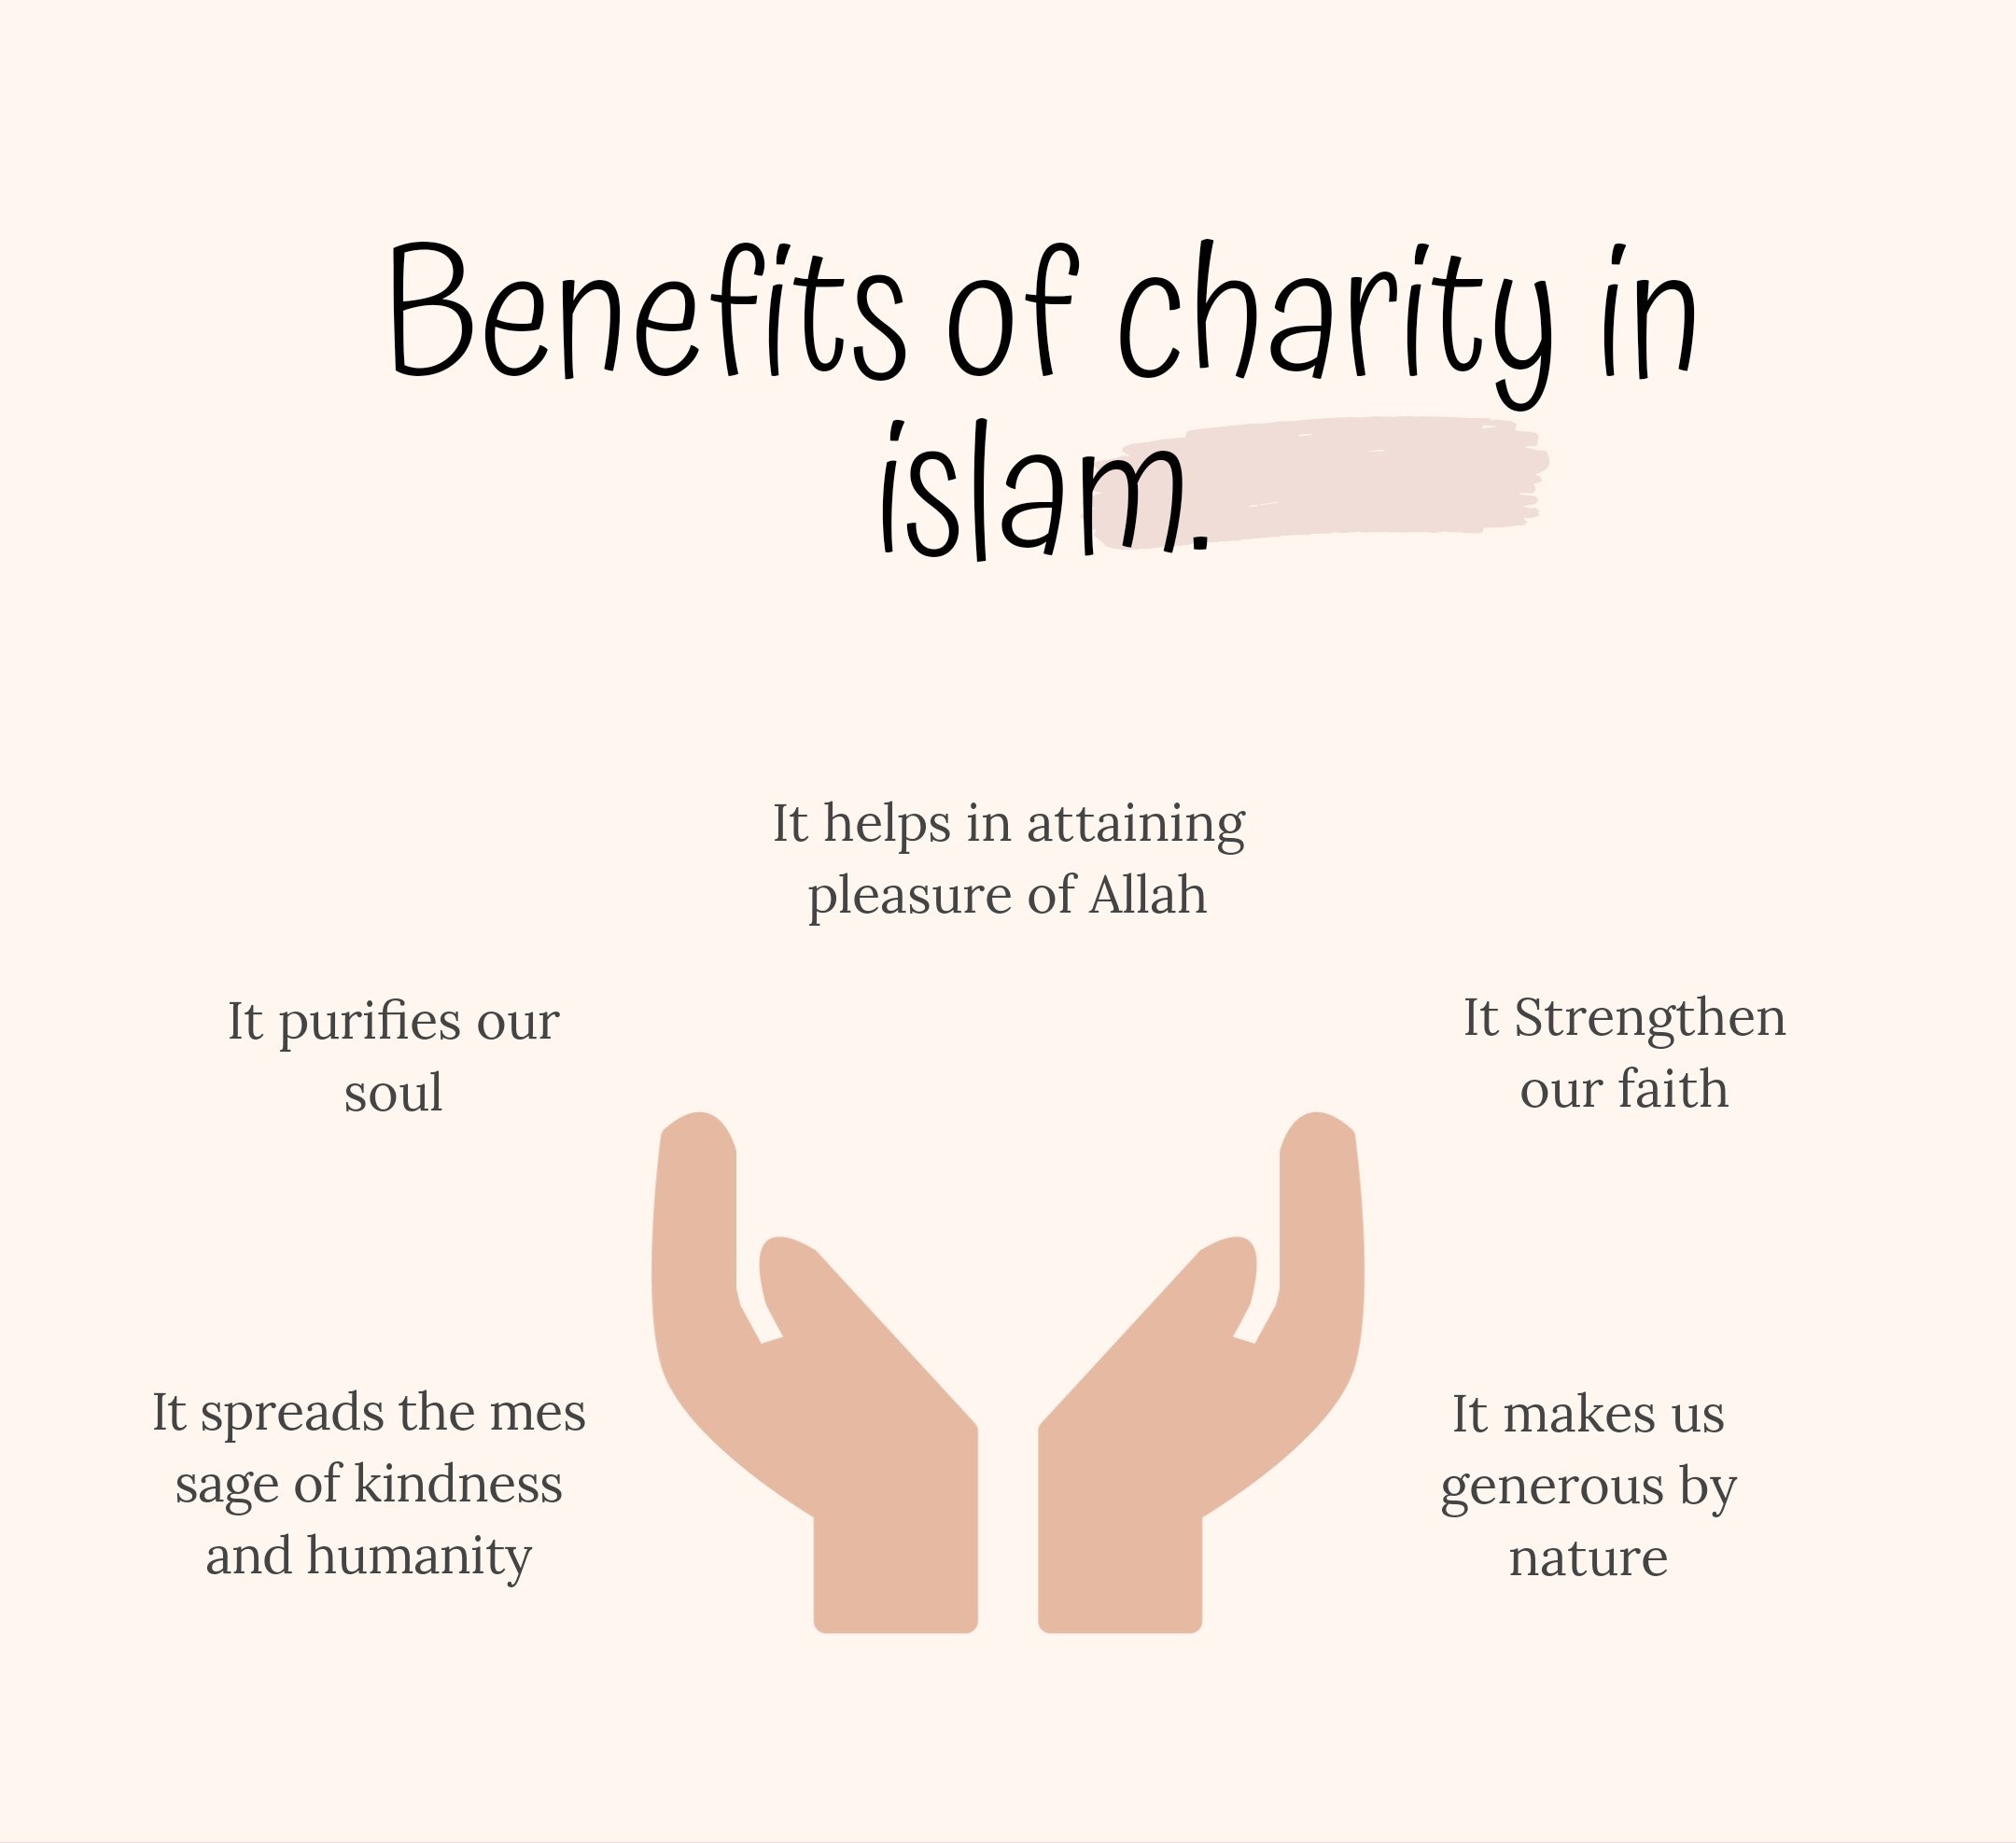 Benefits of Charity